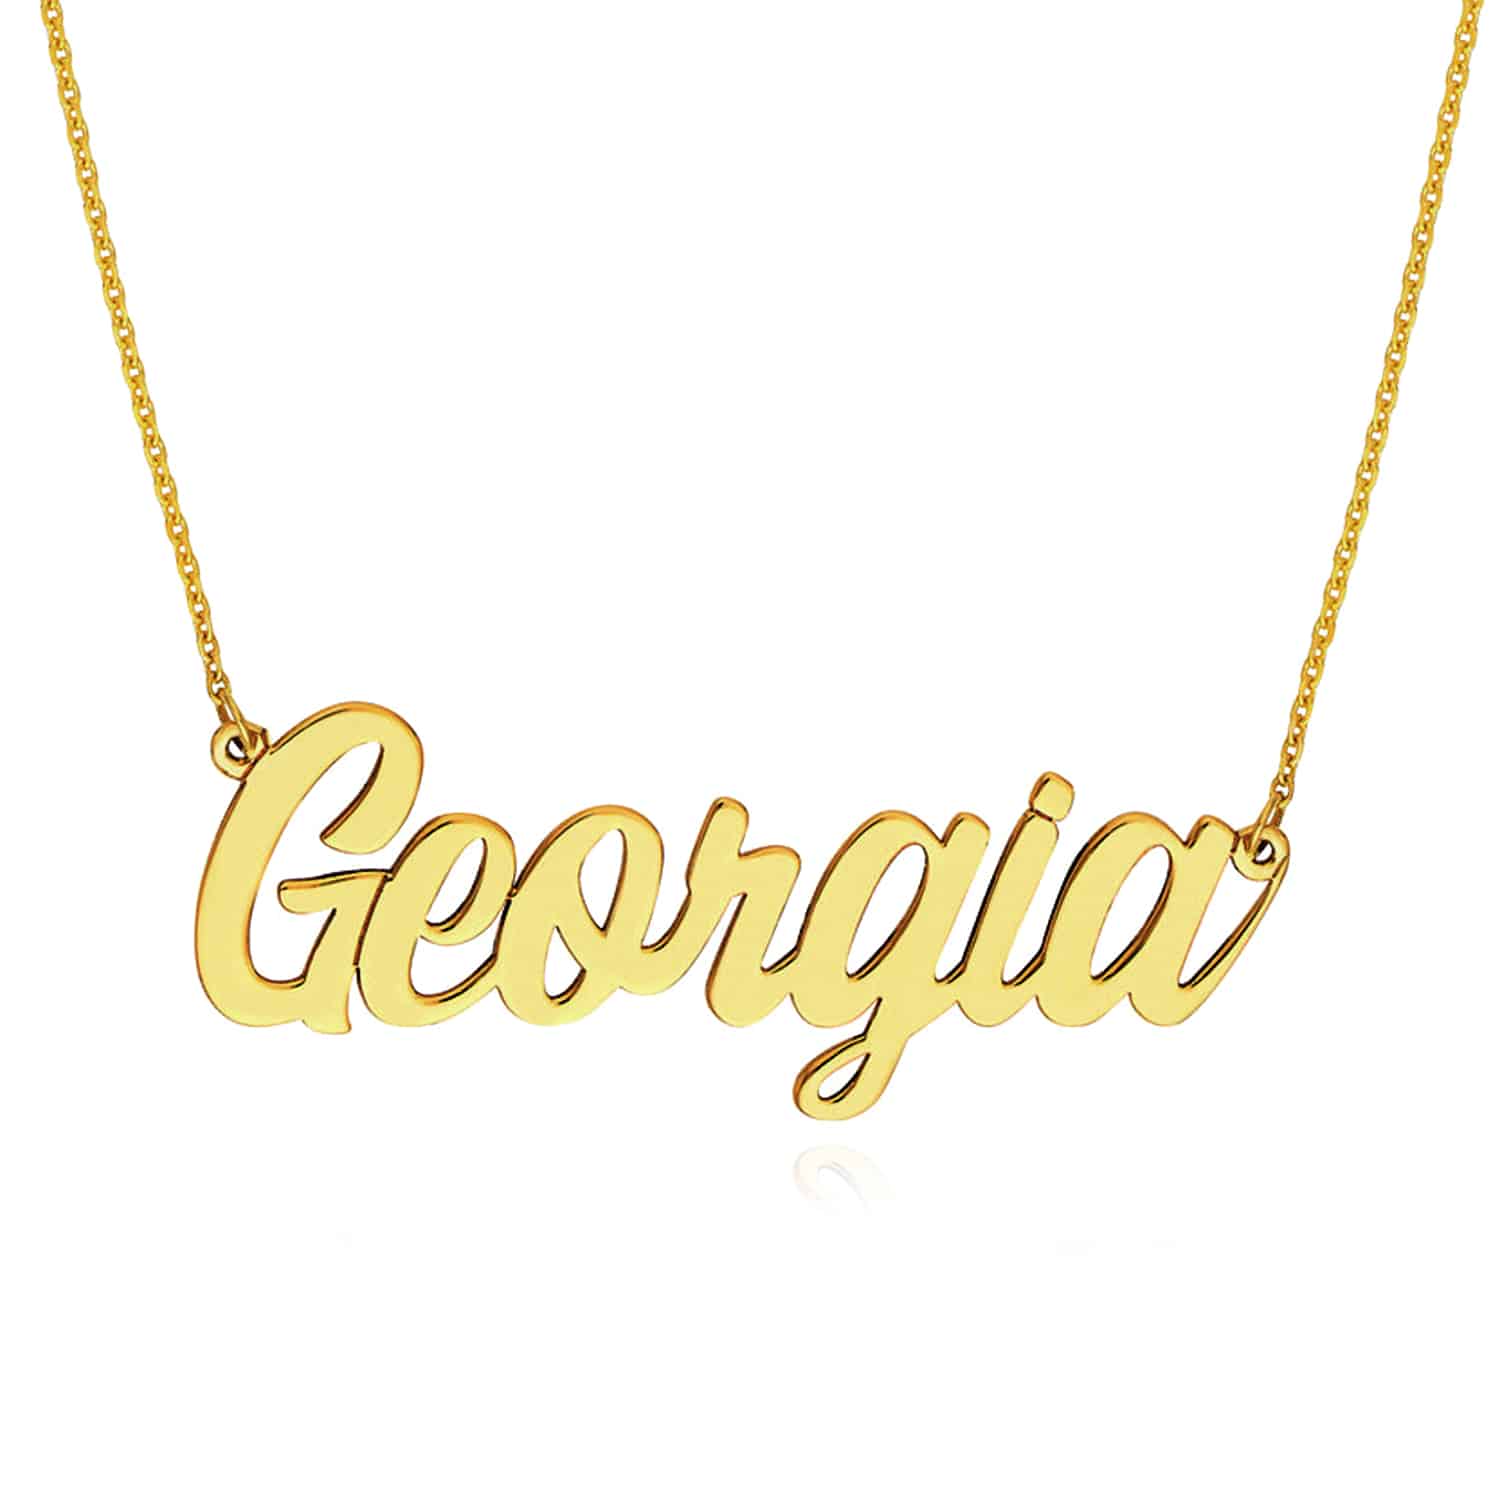 Customizable 14K Gold Yellow White Rose Script Font Nameplate Pendant Necklace - Yellow Gold, 14"-16" Adjustable